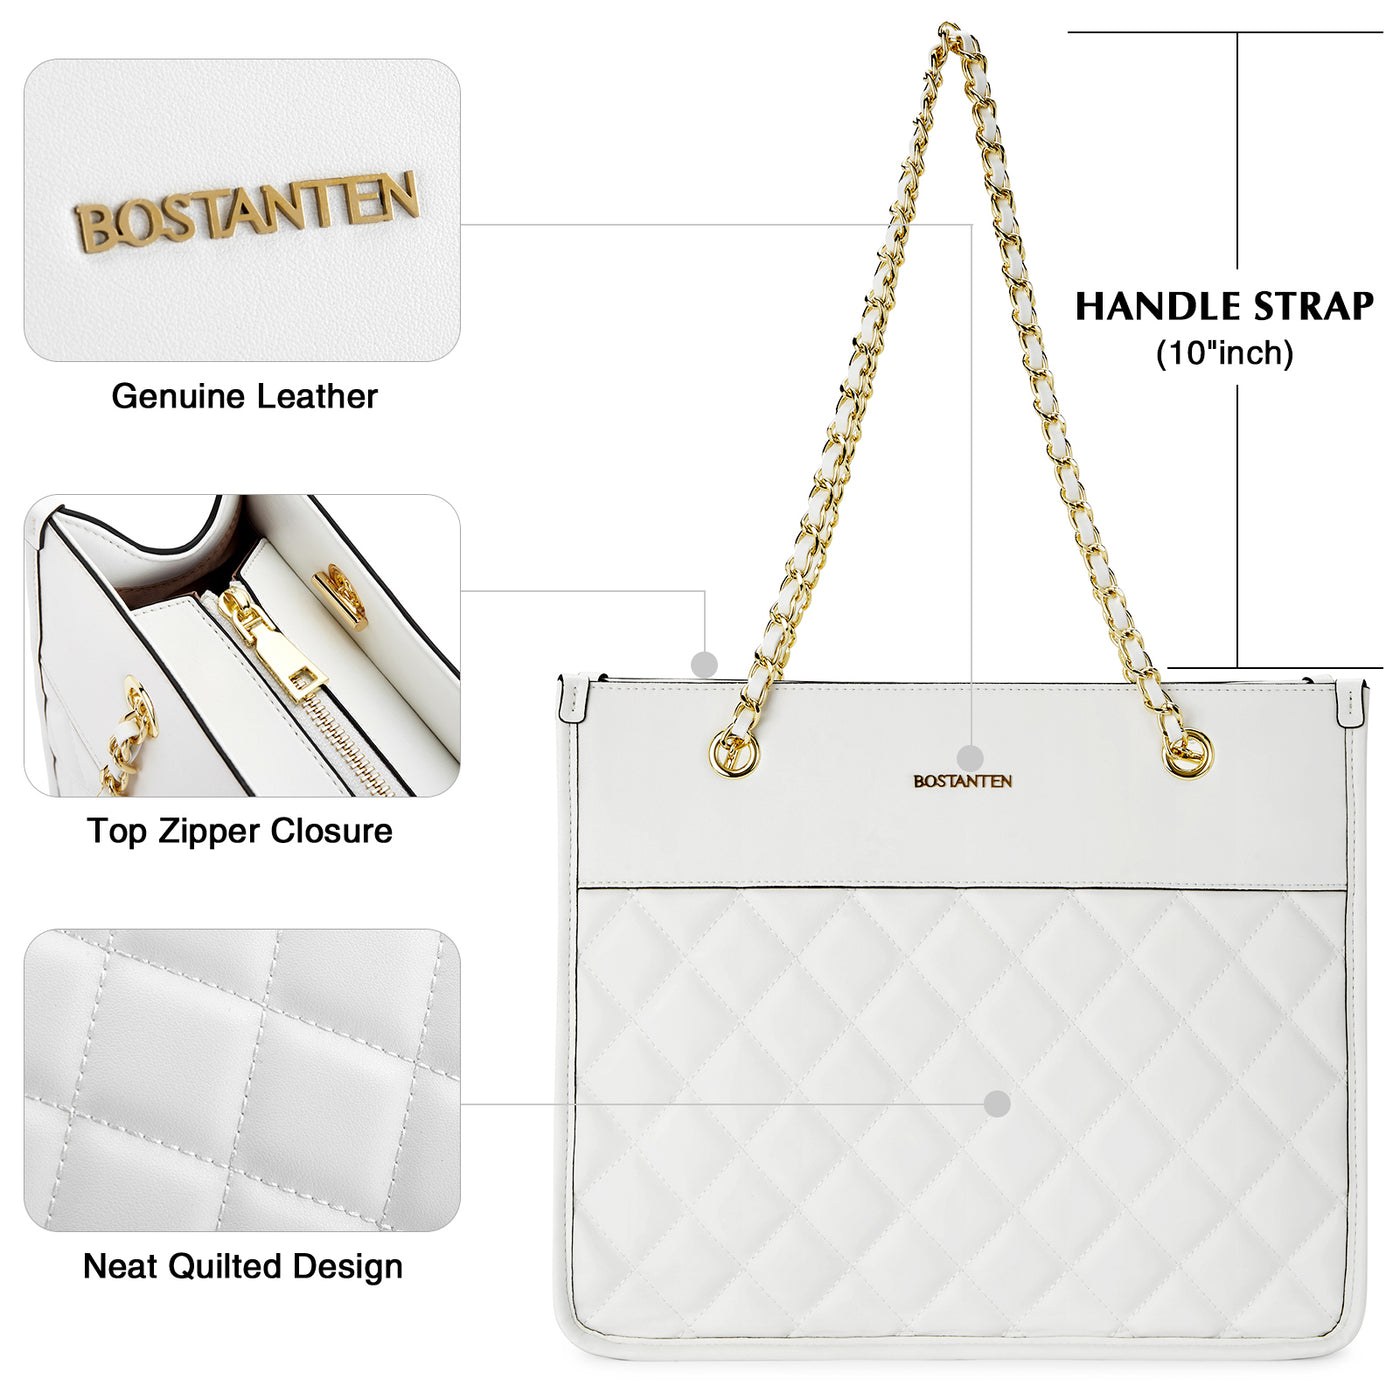 BOSTANTEN Handbags for Women Designer Leather Purses Quilted Shoulder Tote Bag with Chain Strap - BOSTANTEN